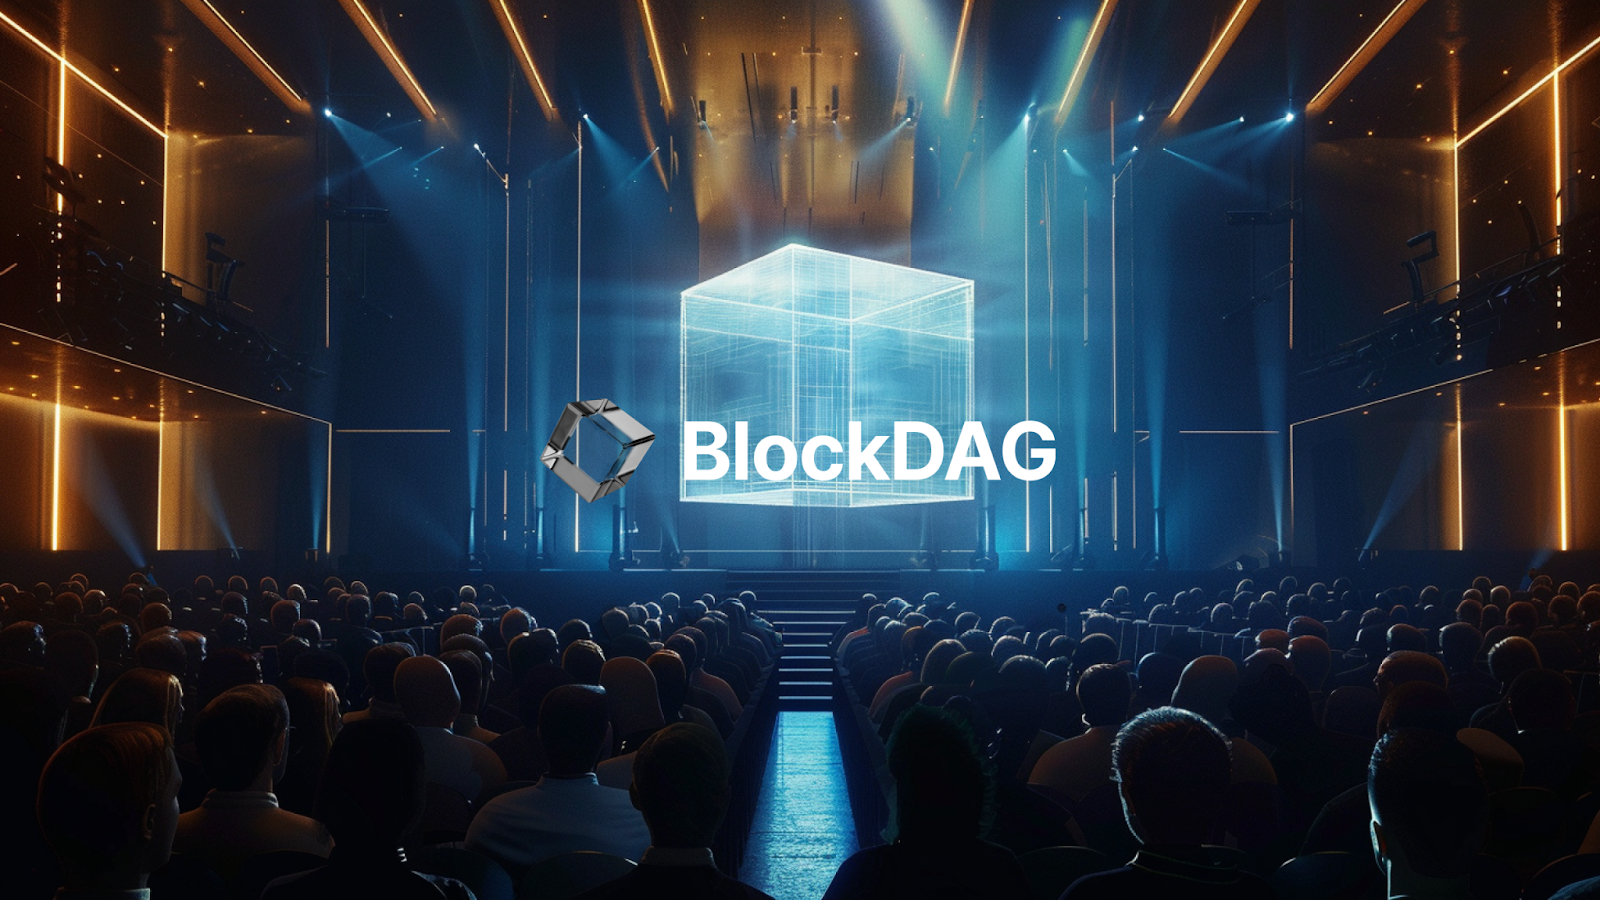 Could BlockDAG Be Your Next Crypto Crush? A Five-Star BlockDAG Review Spills the Secrets 